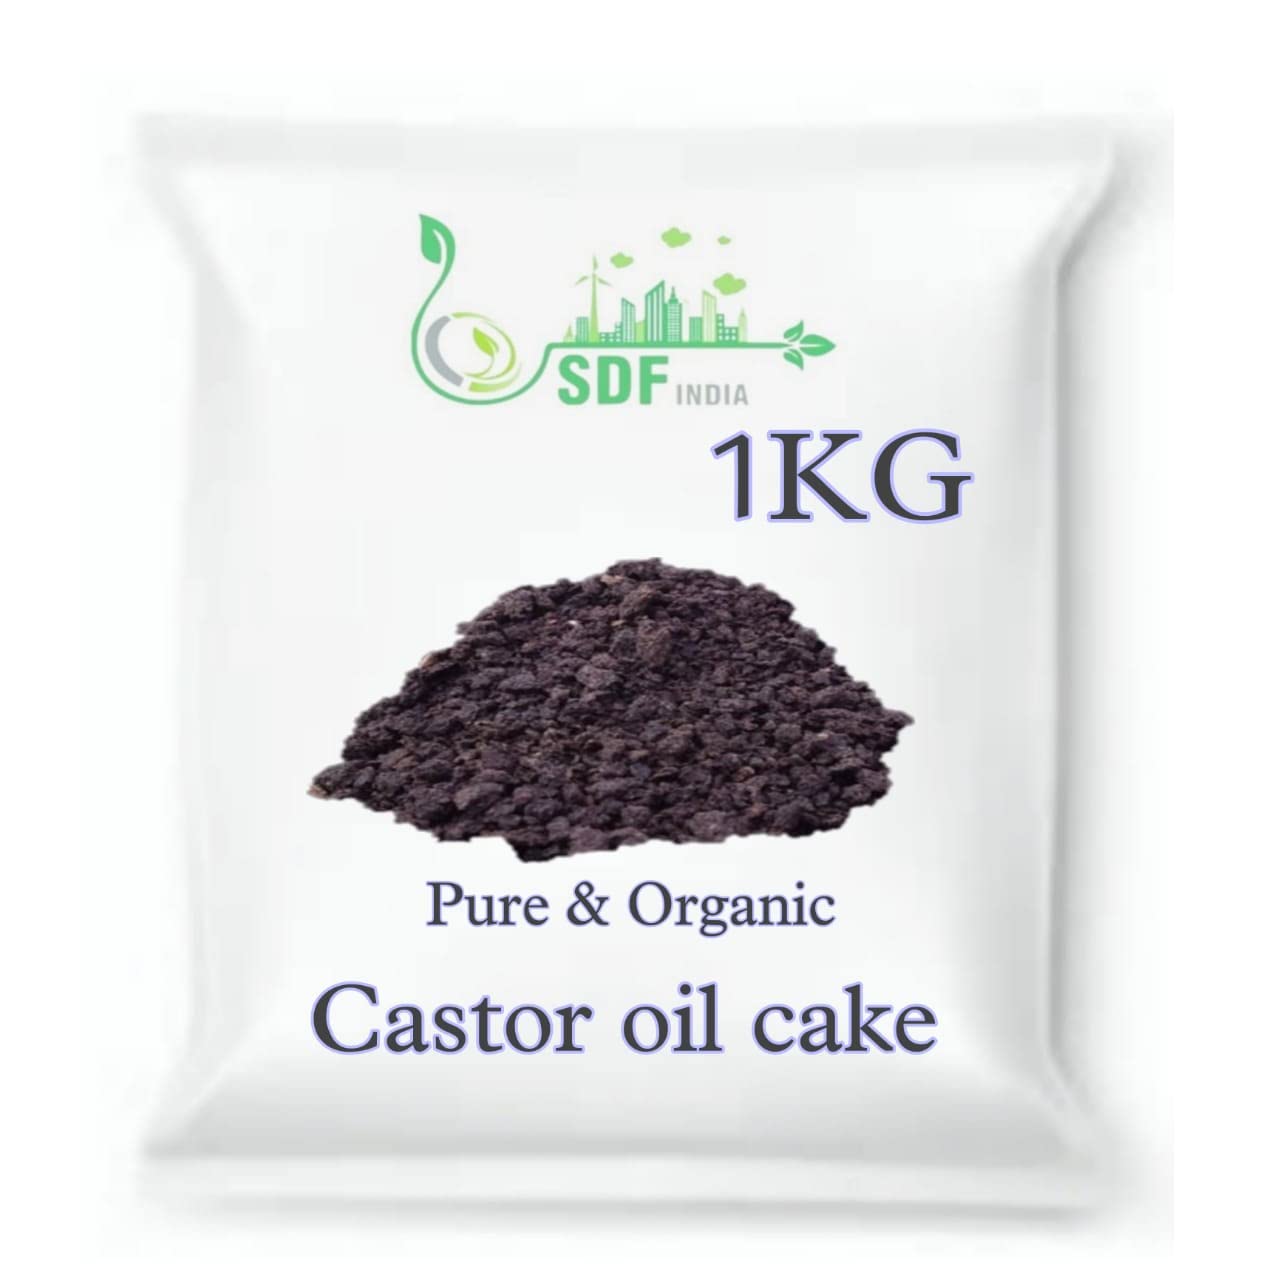 Castor Oil cake is produced from crushing castor seed. The cake from t... |  TikTok